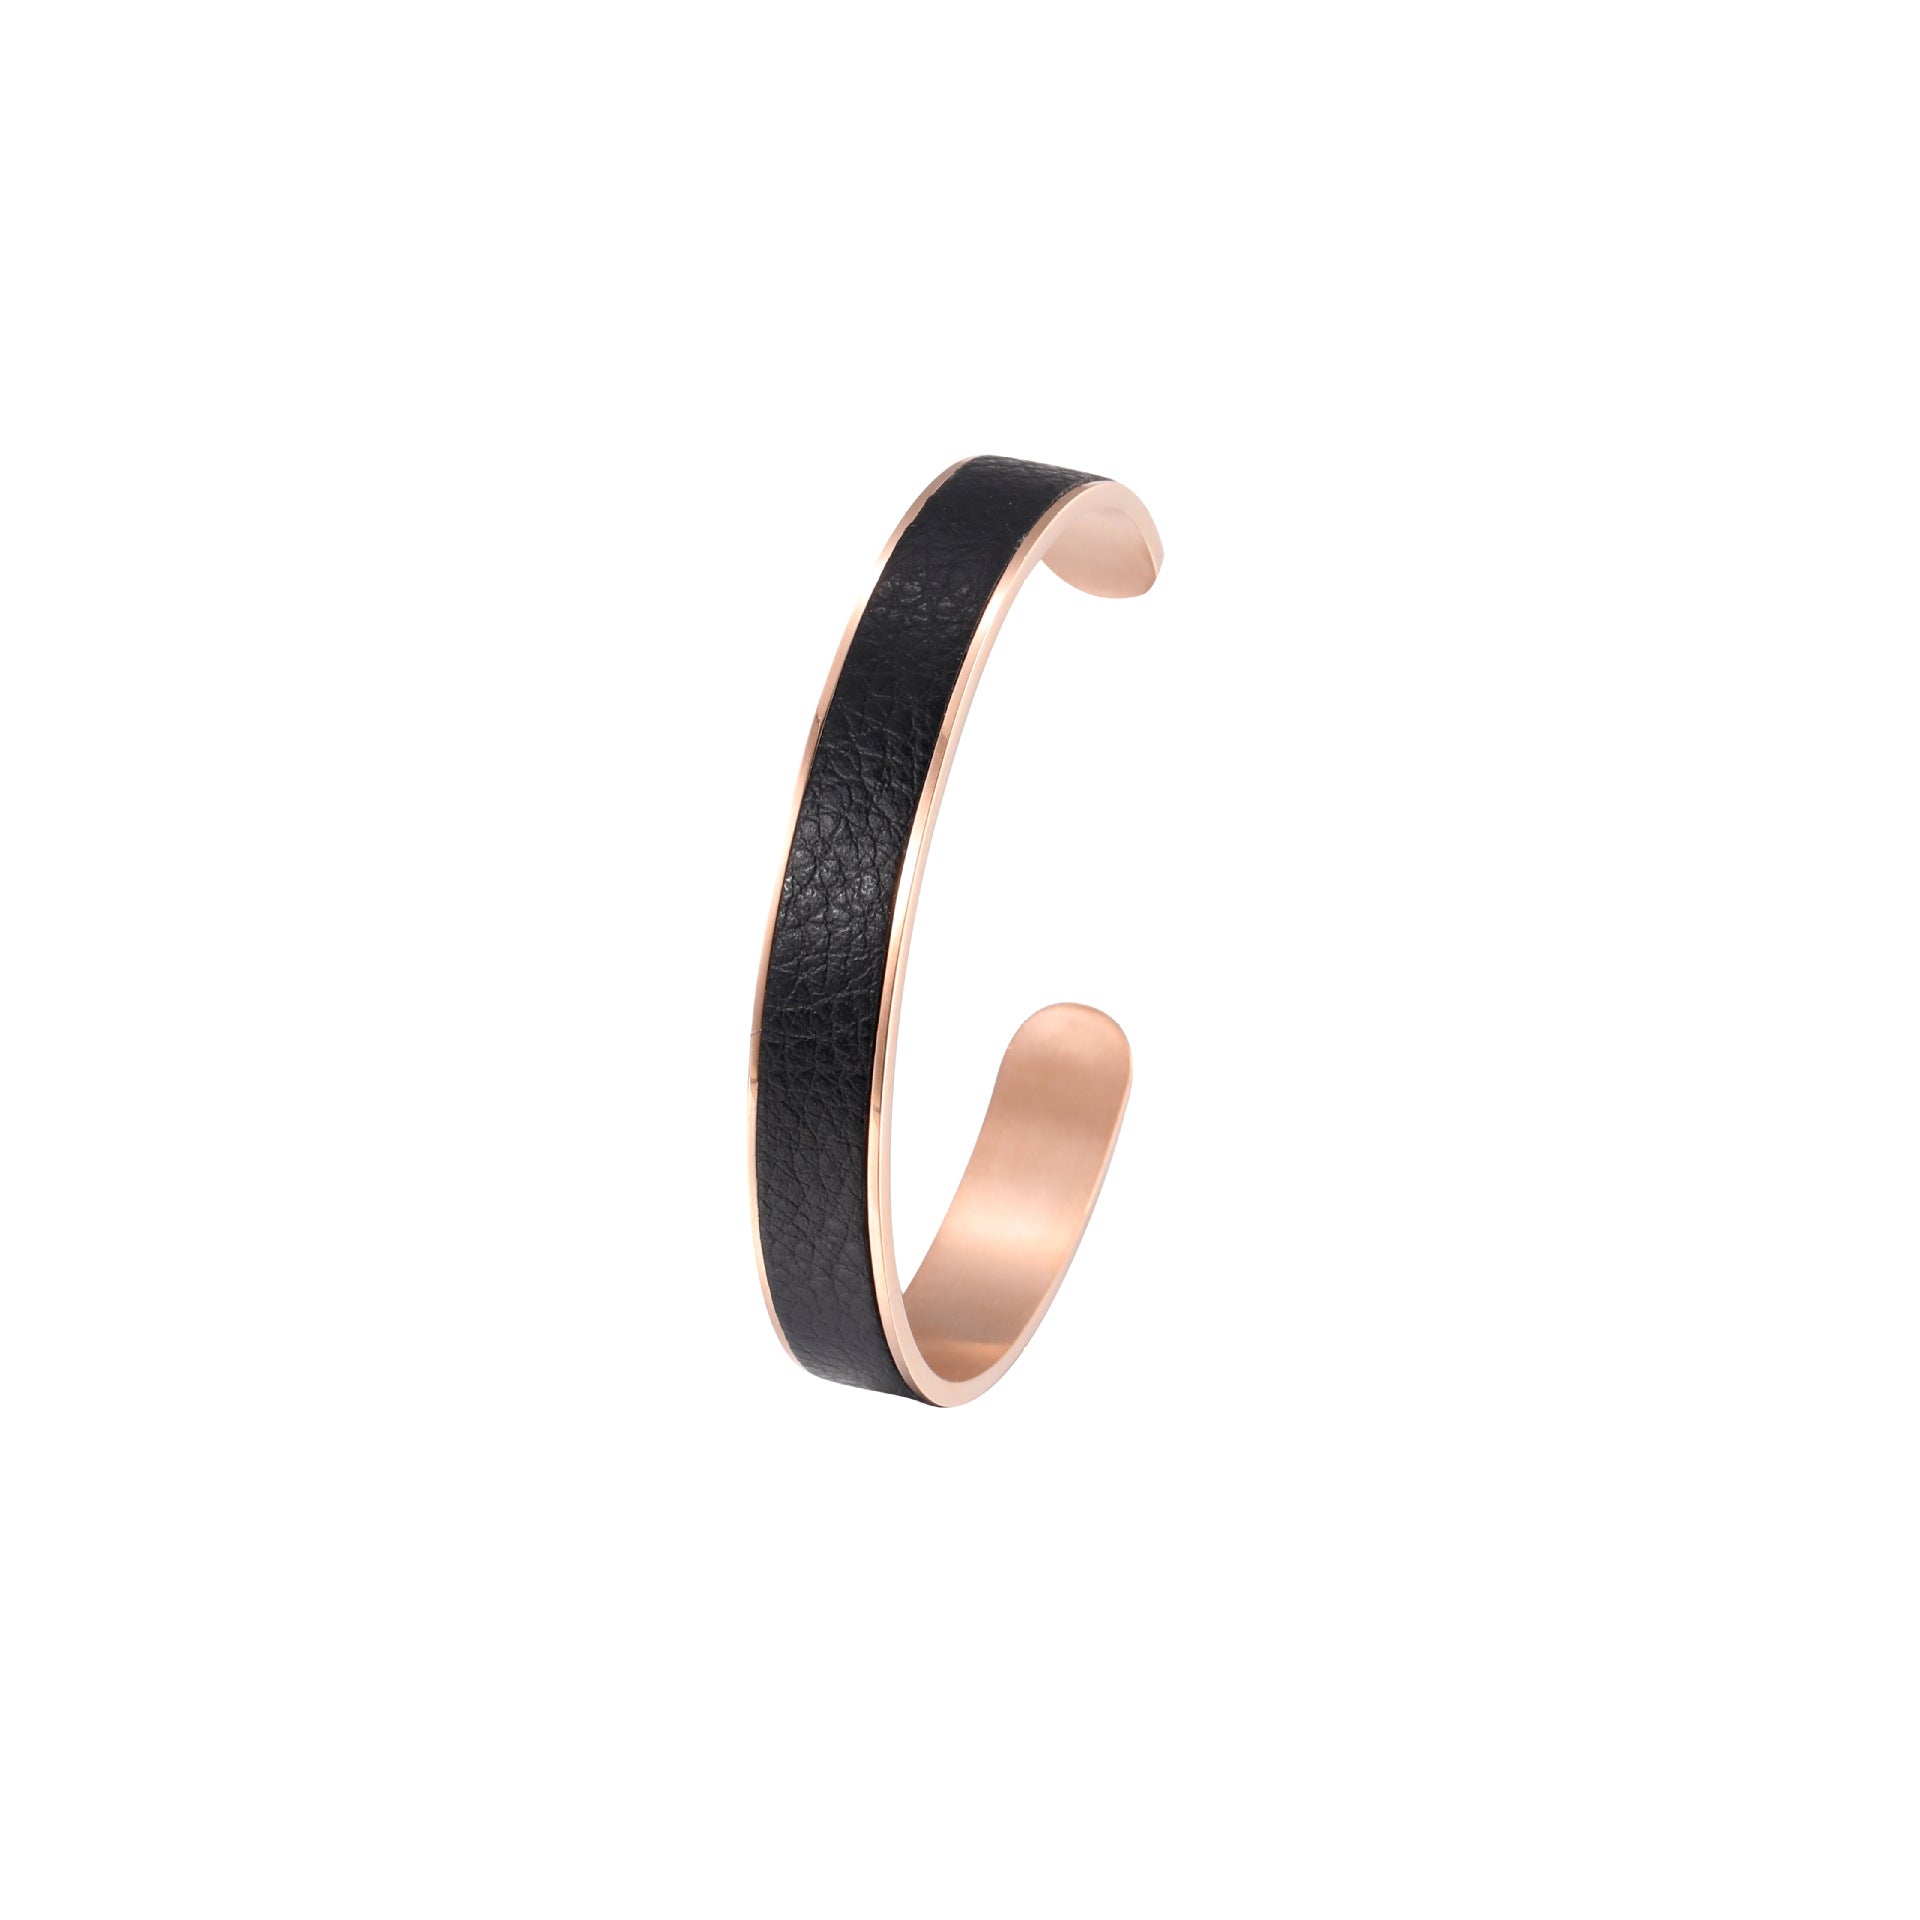 Personalized Women's Simple and Elegant Leather C-Shaped Open Bangle  UponBasics   